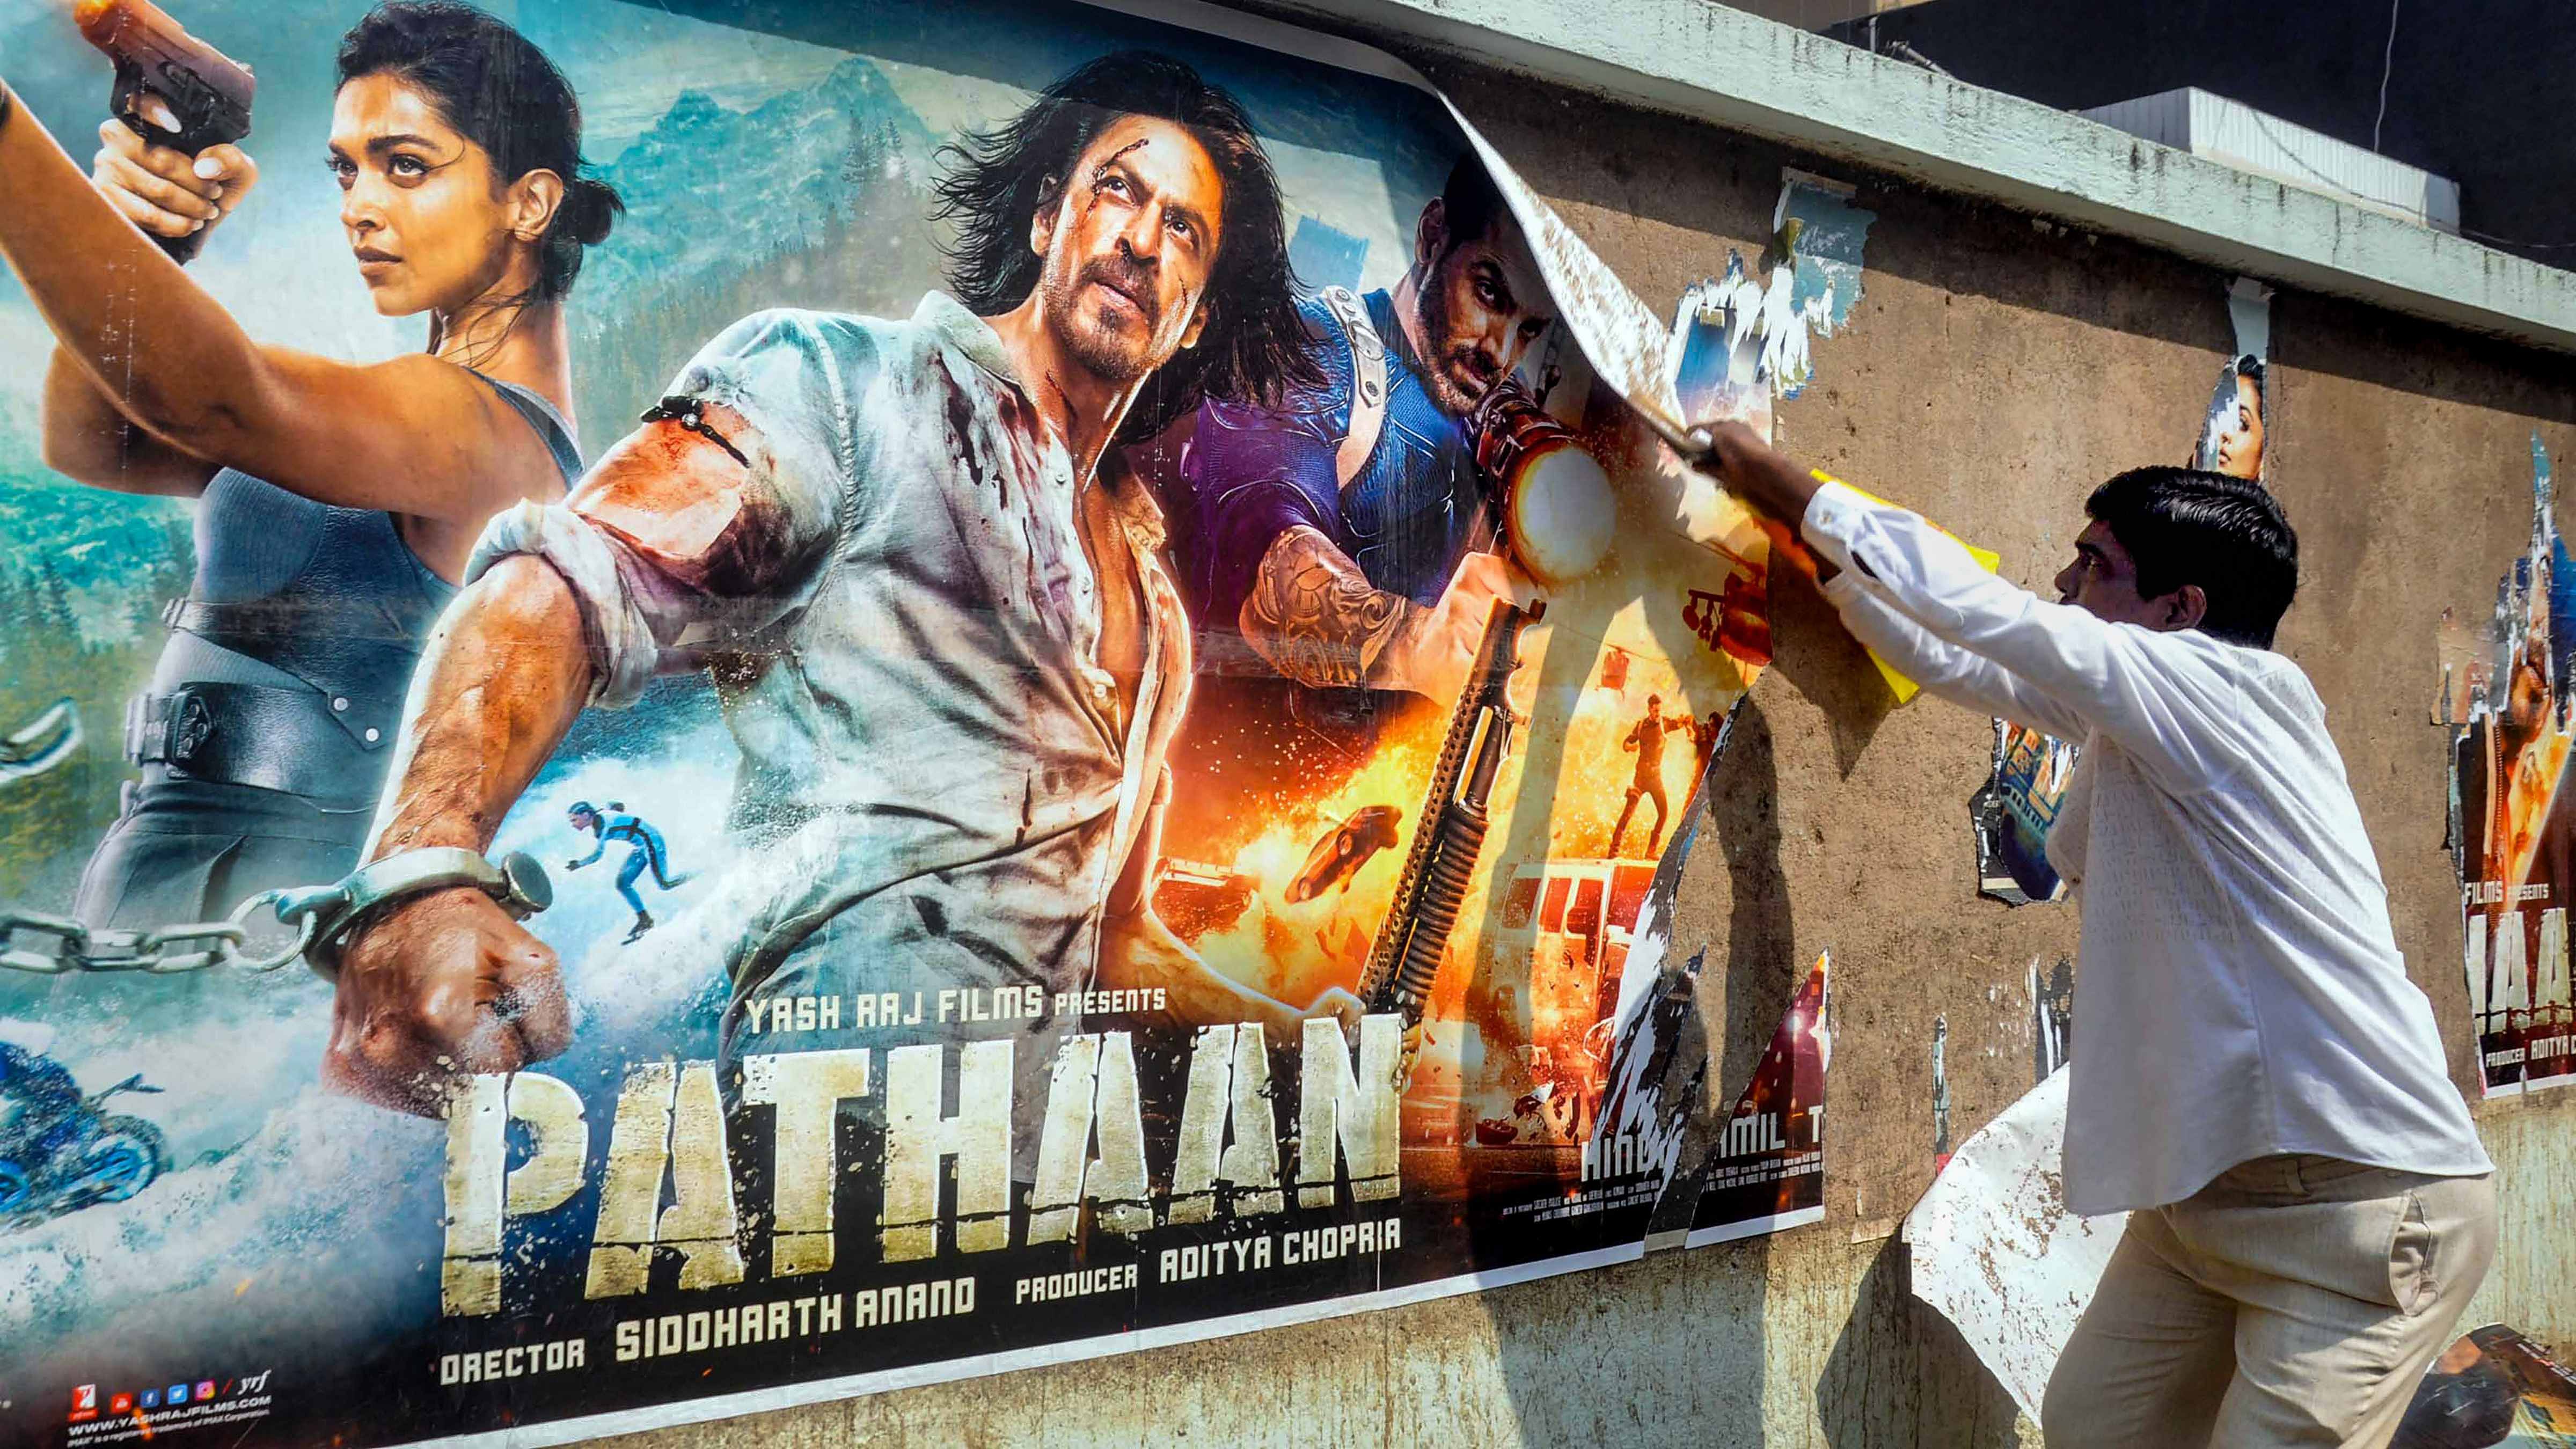 Members of Kalinga Sena tear posters of the newly-released movie 'Pathaan' during a protest, in Bhubaneswar. Credit: PTI Photo